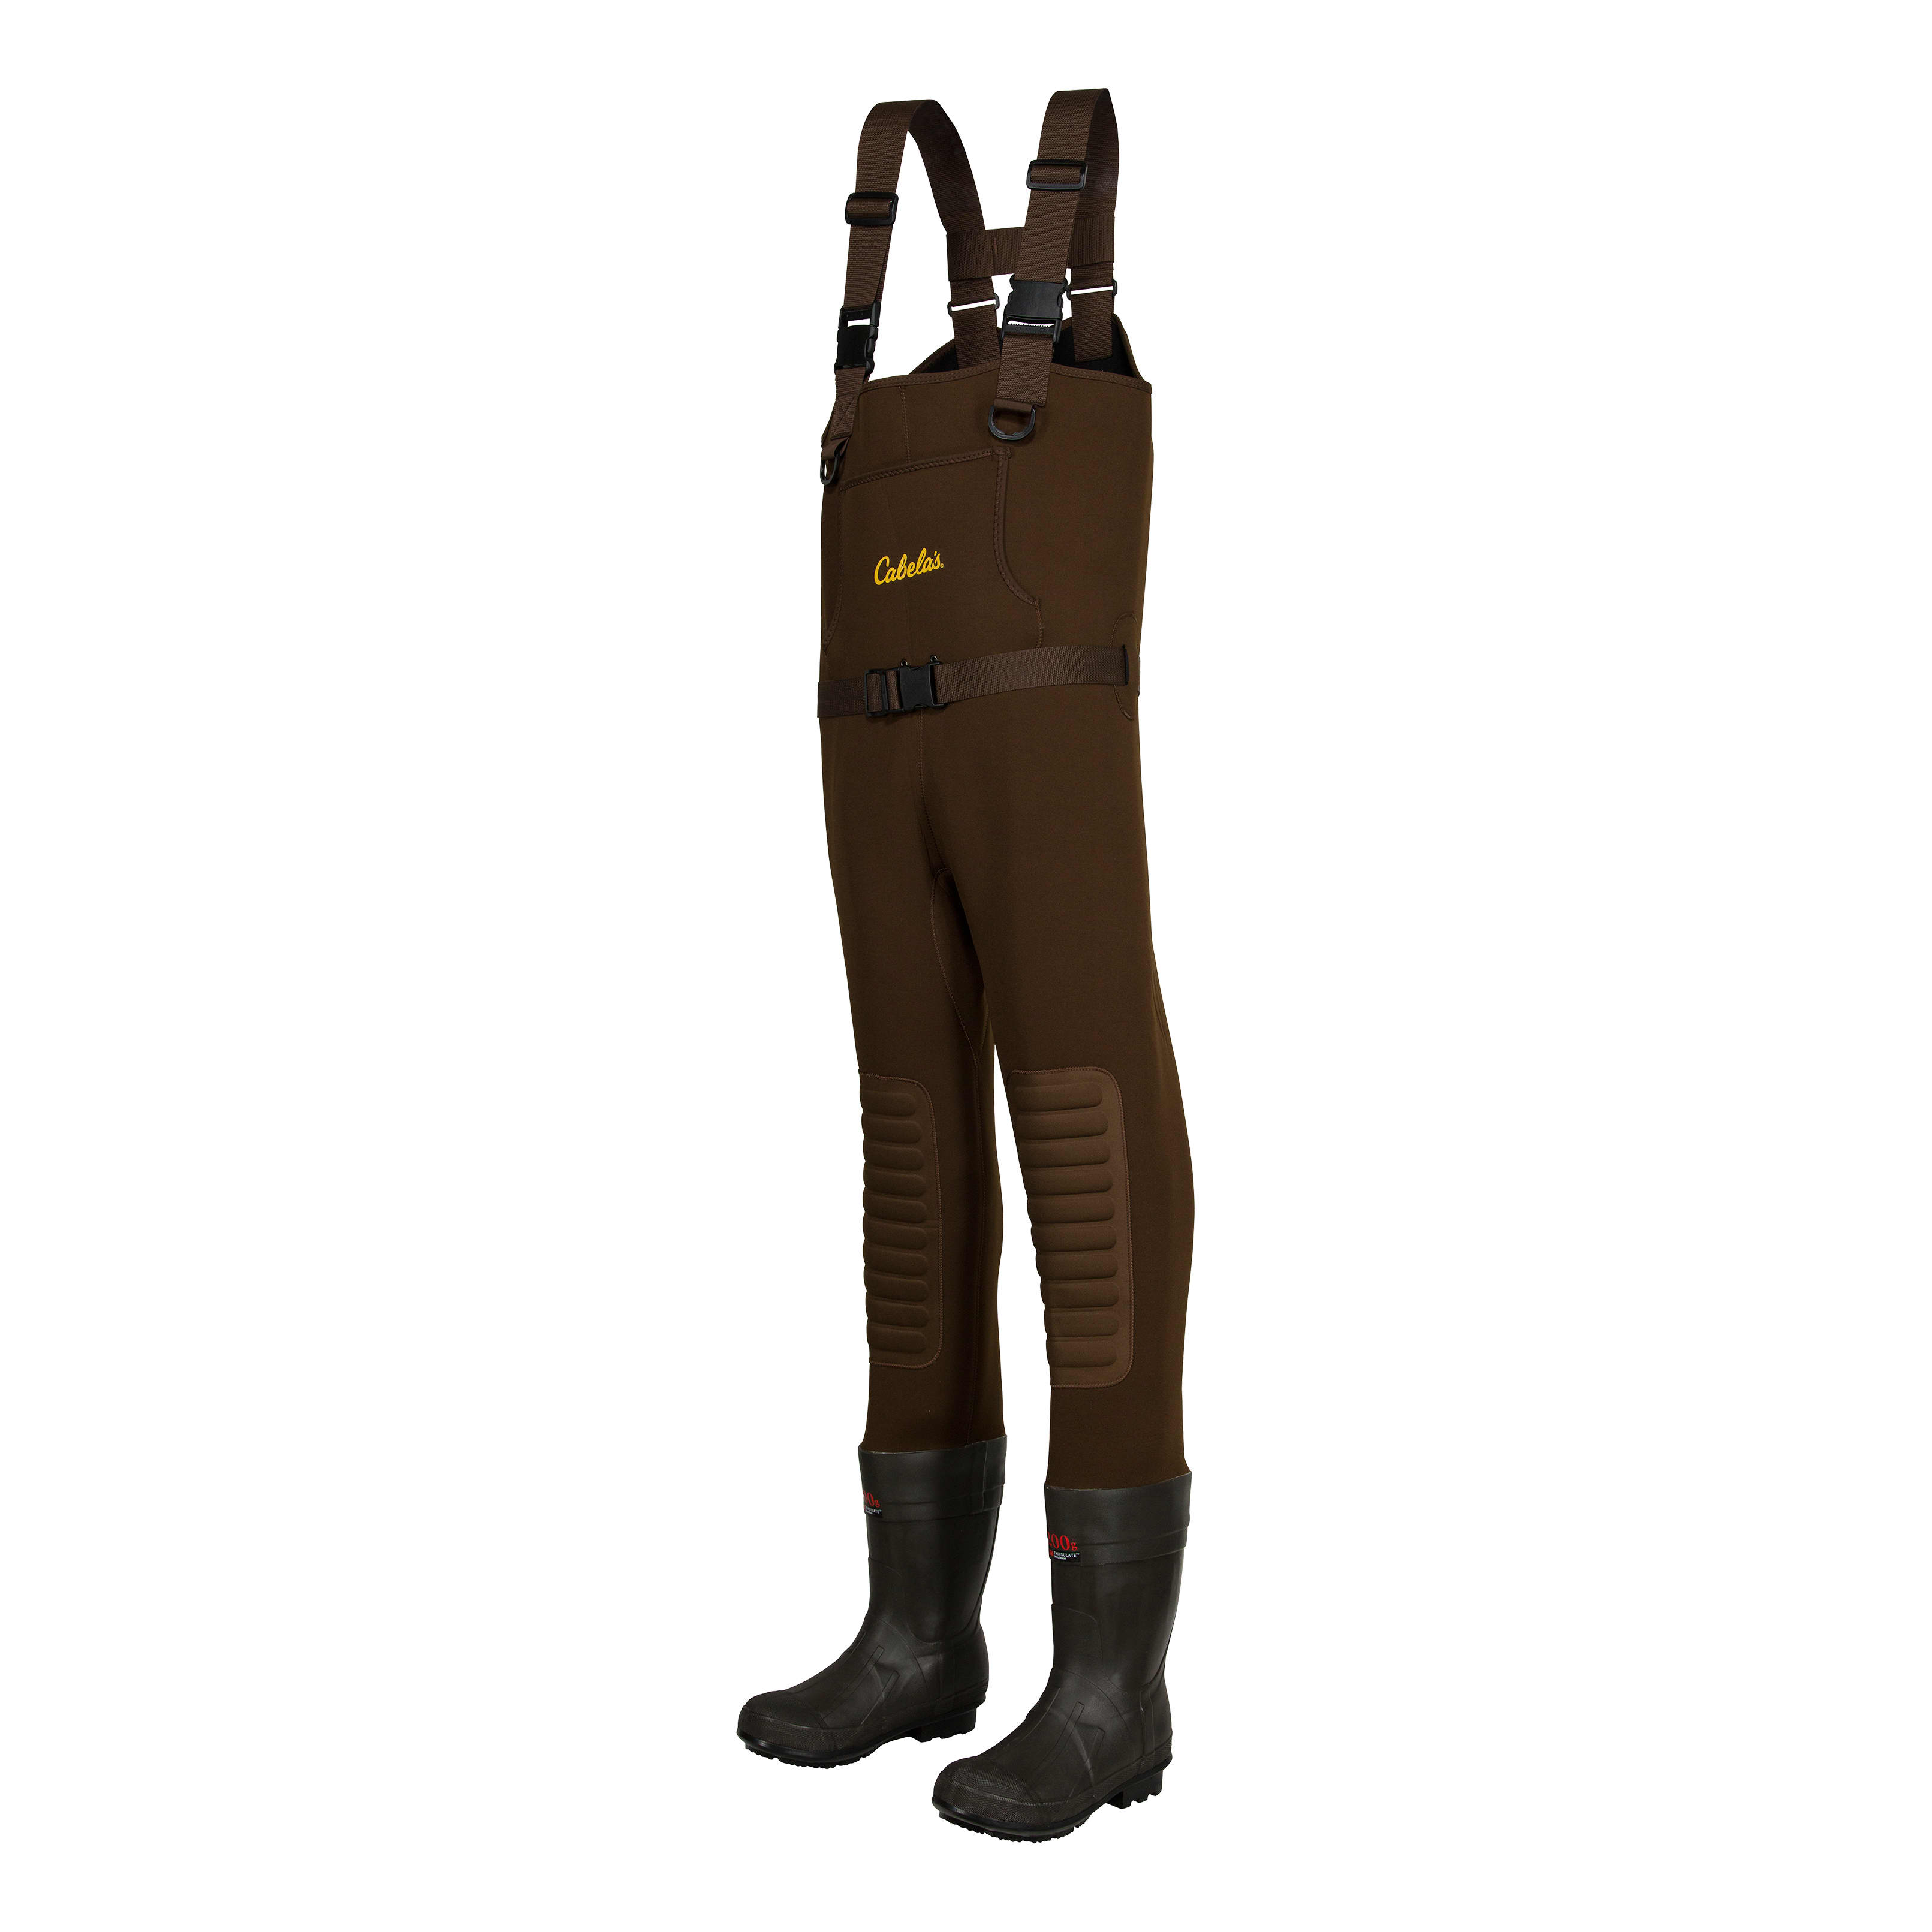 Fishing Waders for Men for sale in Halifax, Nova Scotia